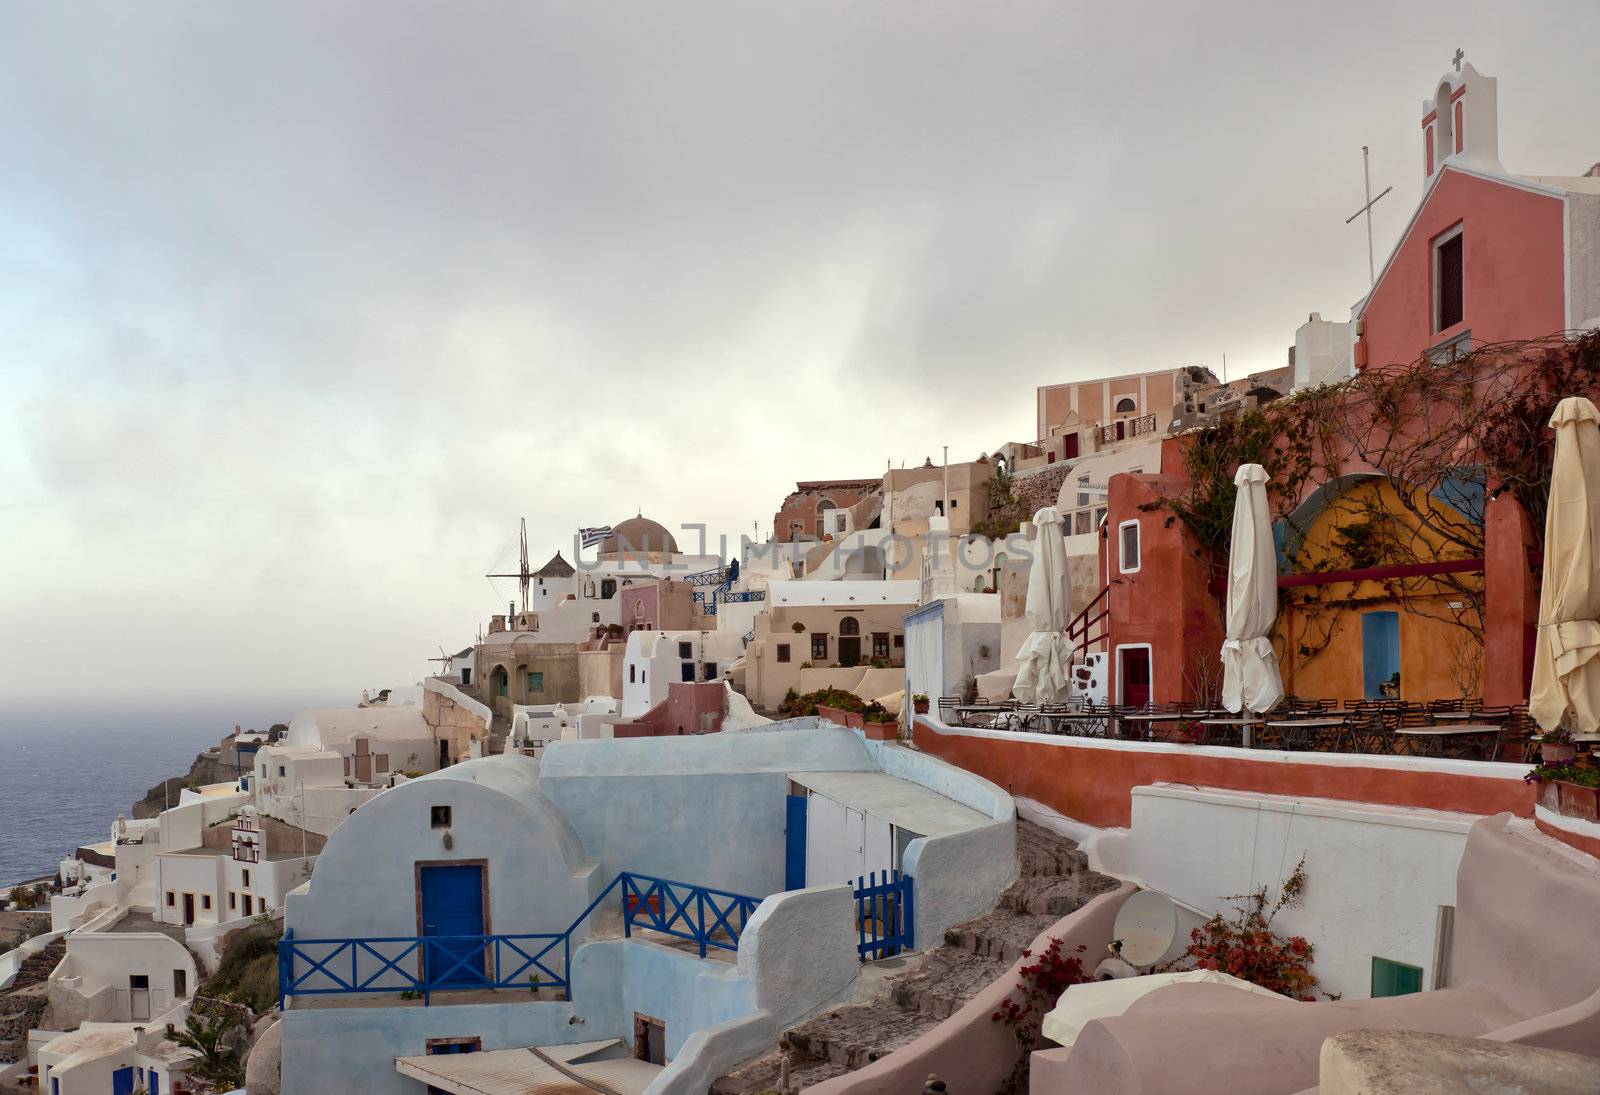 Morning in the cyclades village by mulden